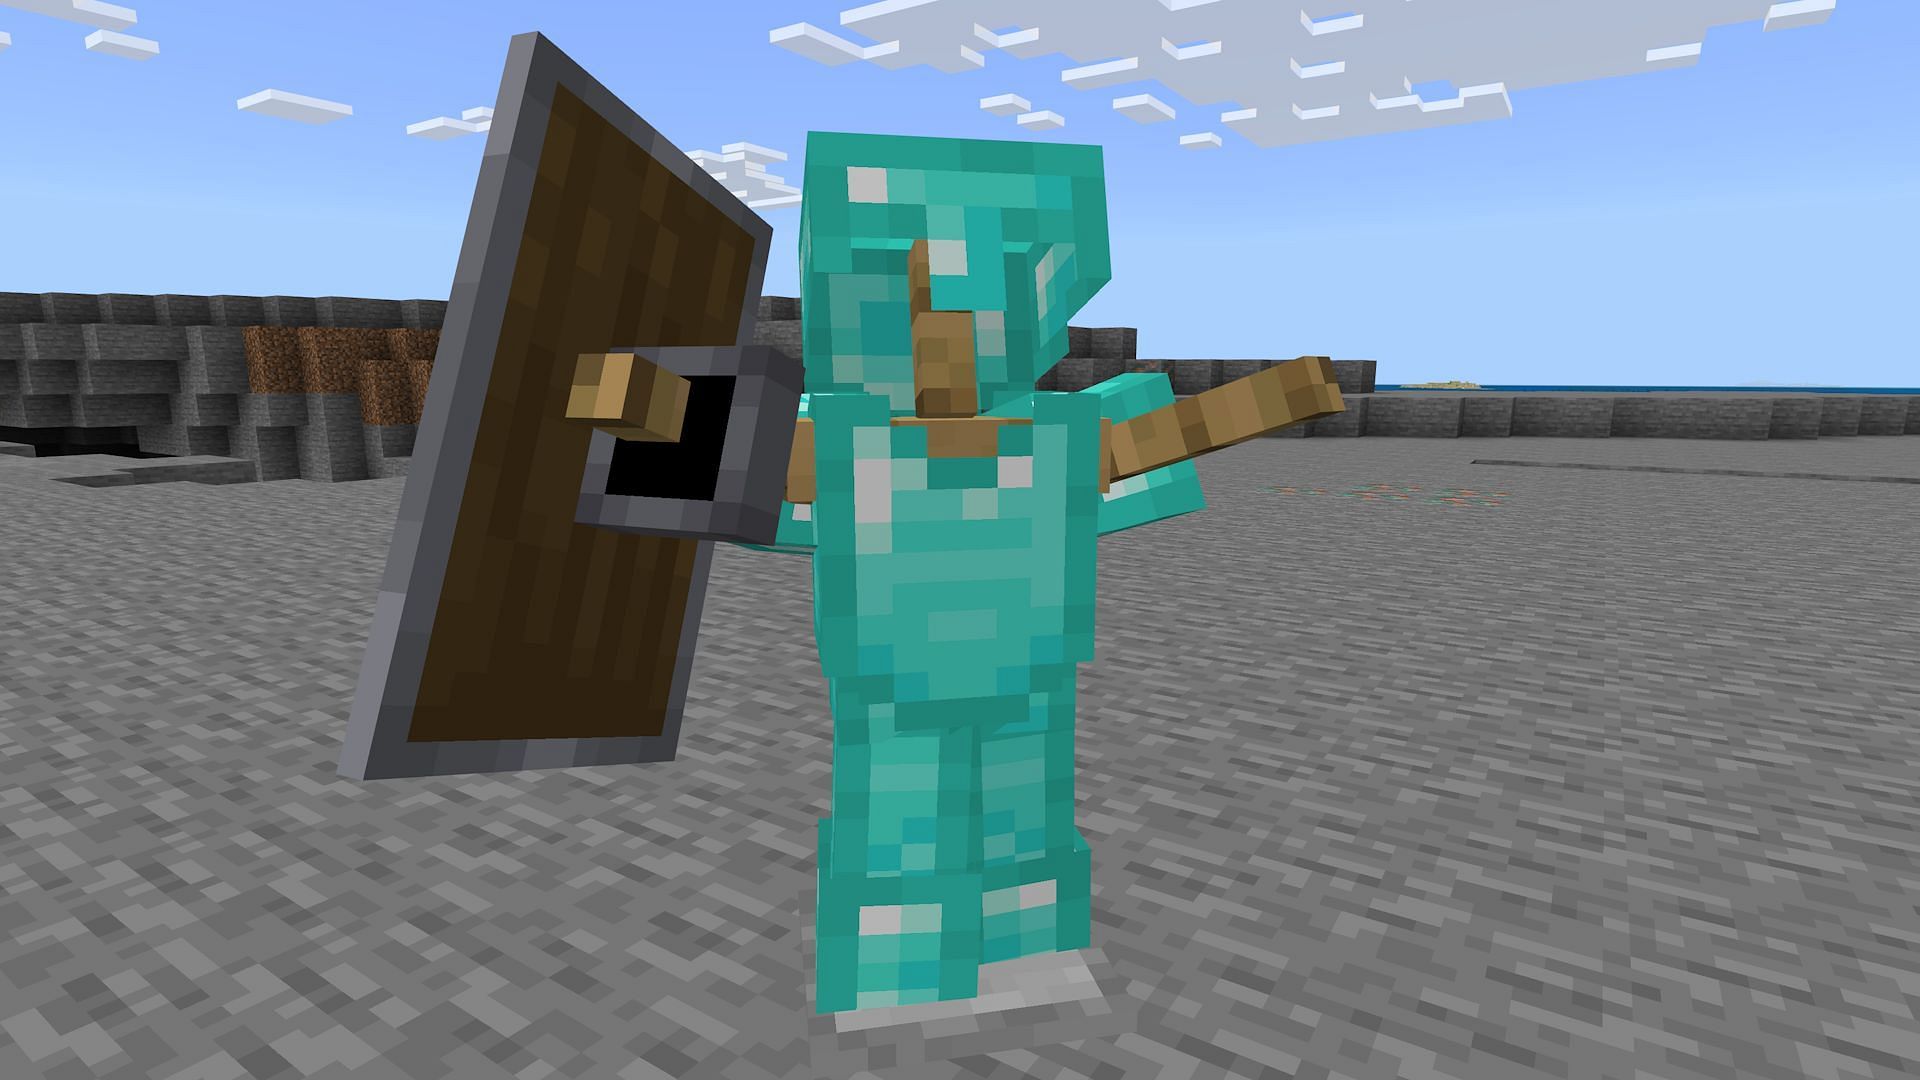 Backup armor can even be kept on armor stands for decoration when not in use (Image via Mojang)